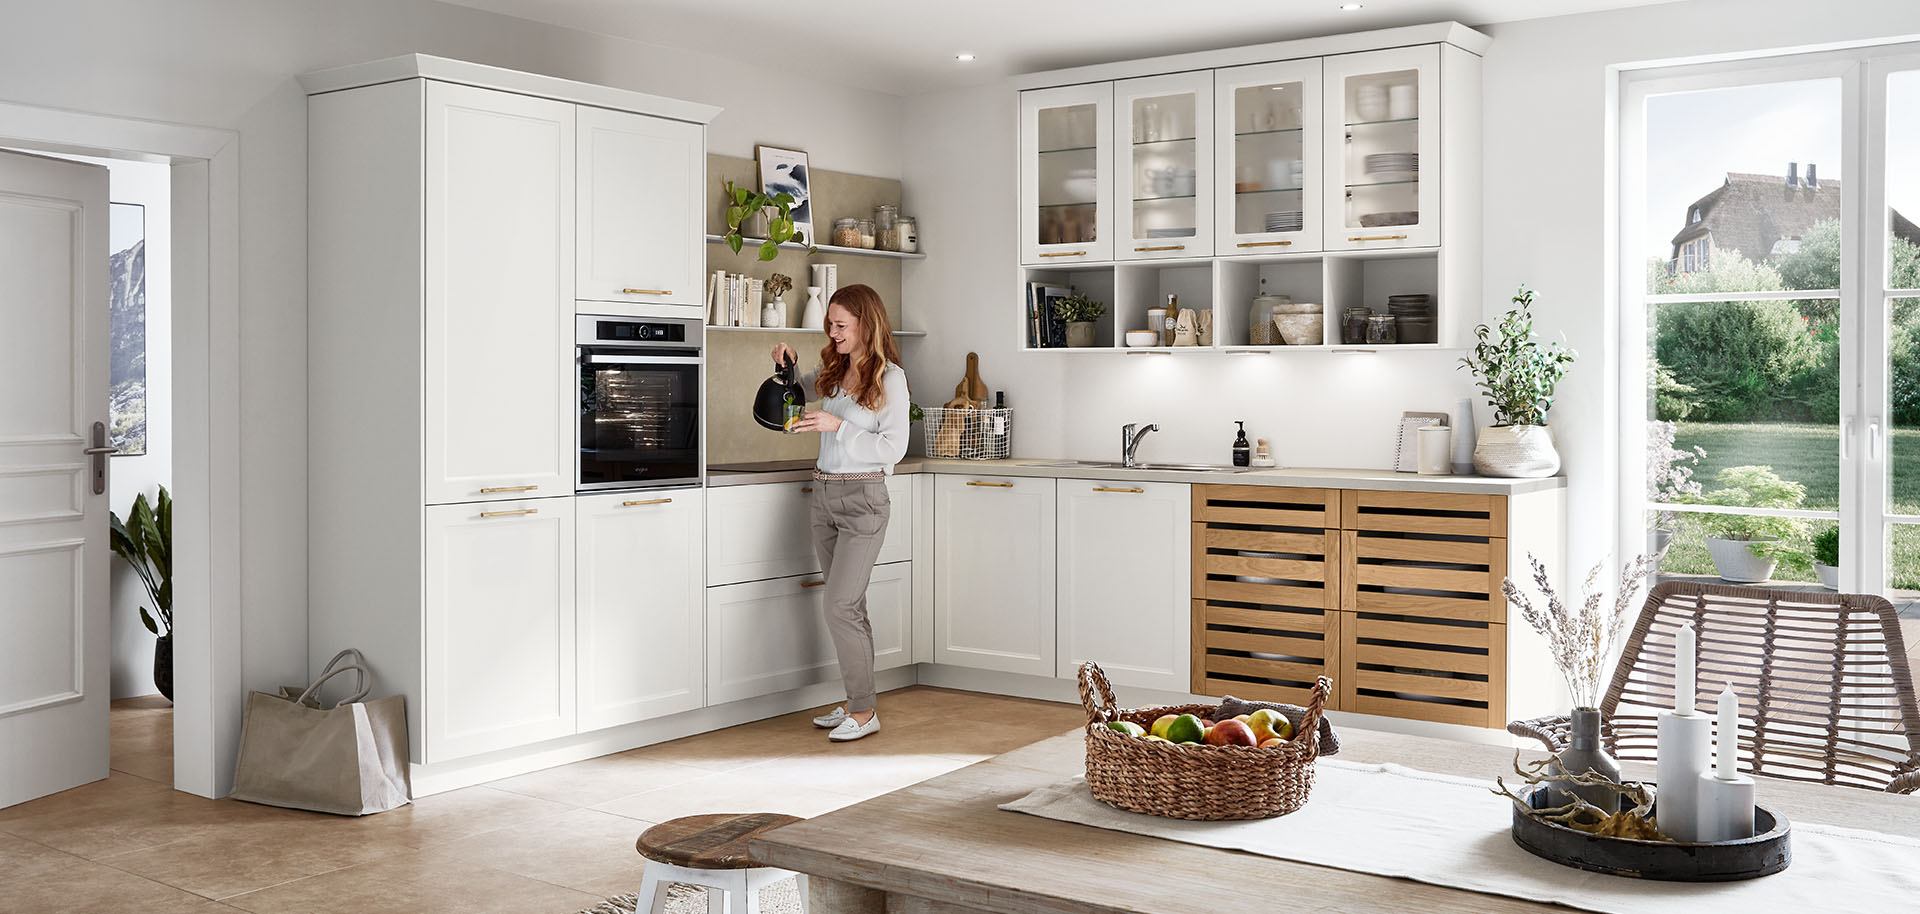 A bright, modern kitchen with white cabinetry and wooden accents. A person is standing, interacting with a smart device, amidst the sunlight-filled space.